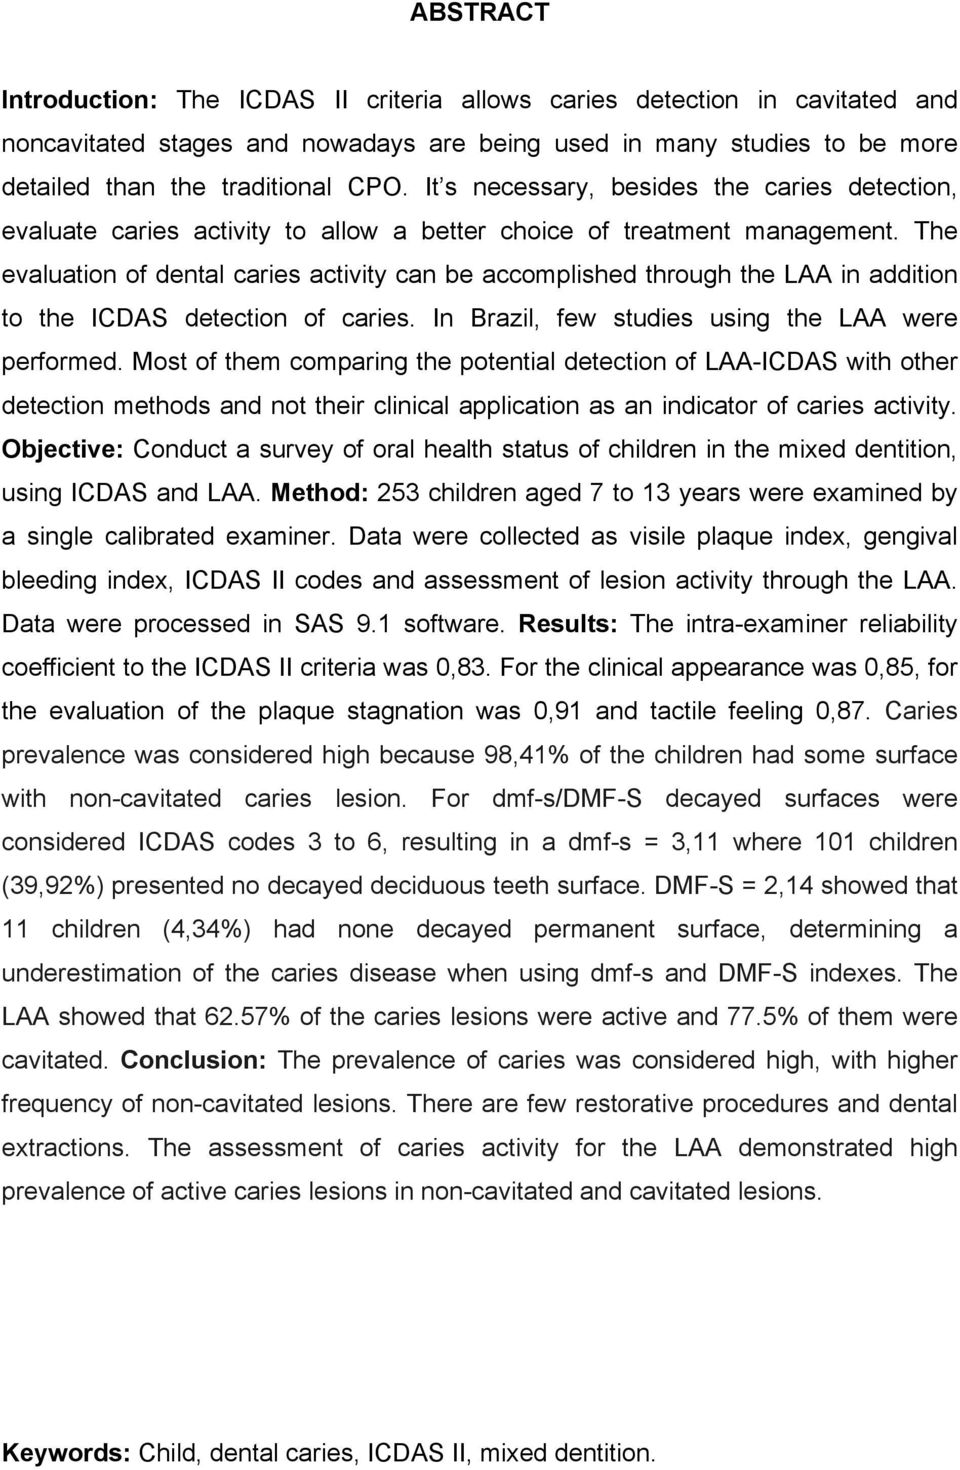 The evaluation of dental caries activity can be accomplished through the LAA in addition to the ICDAS detection of caries. In Brazil, few studies using the LAA were performed.